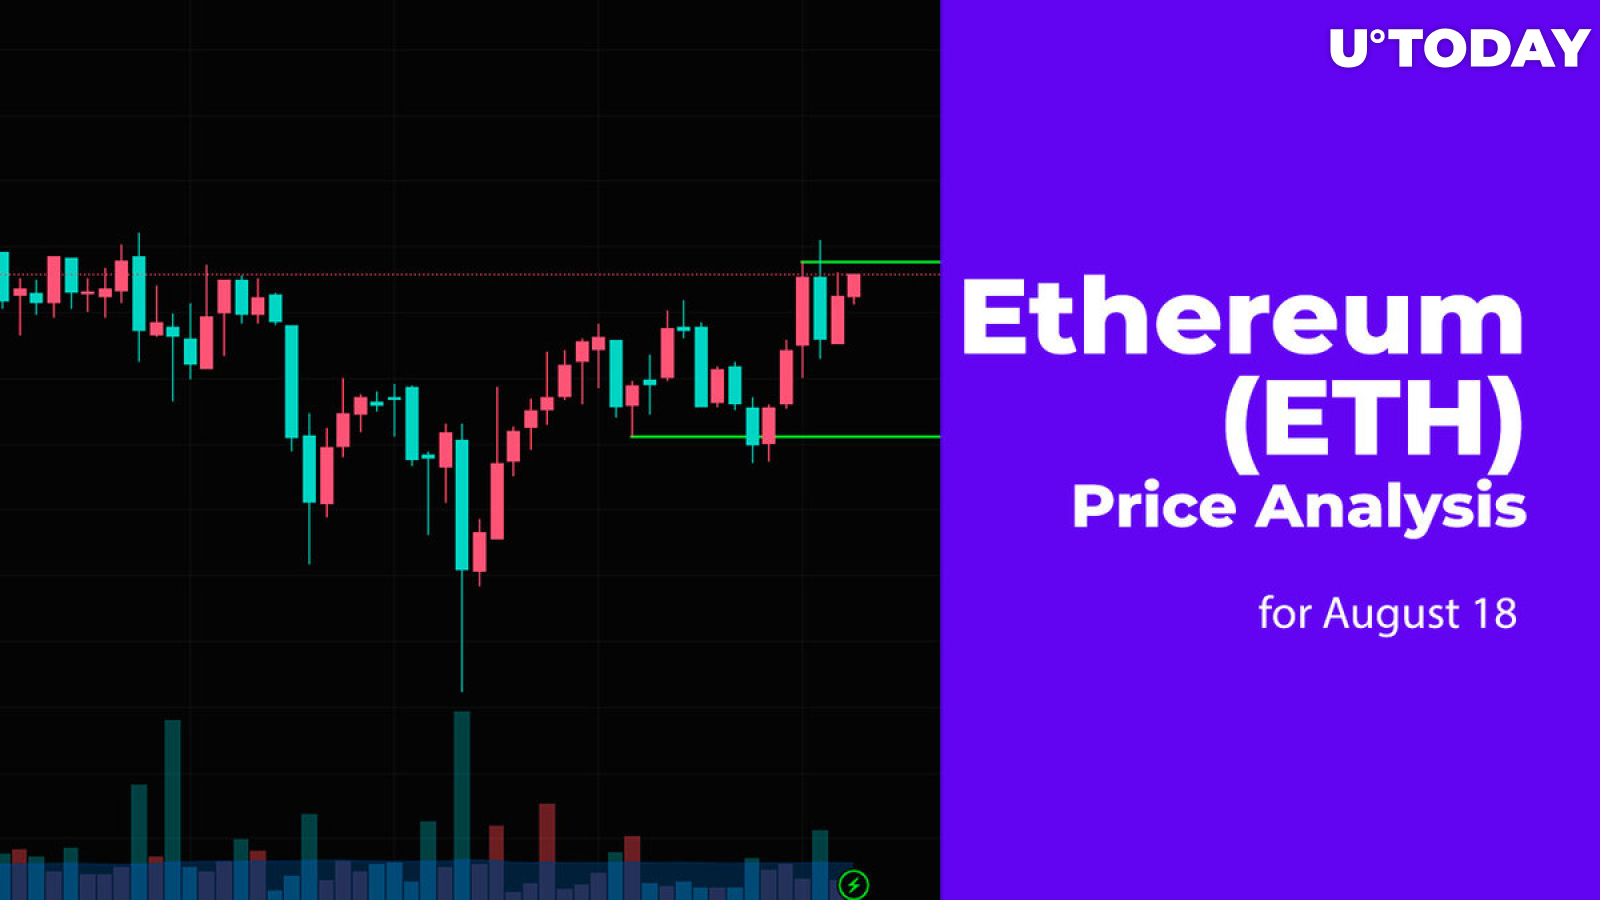 Ethereum (ETH) Price Analysis for August 18